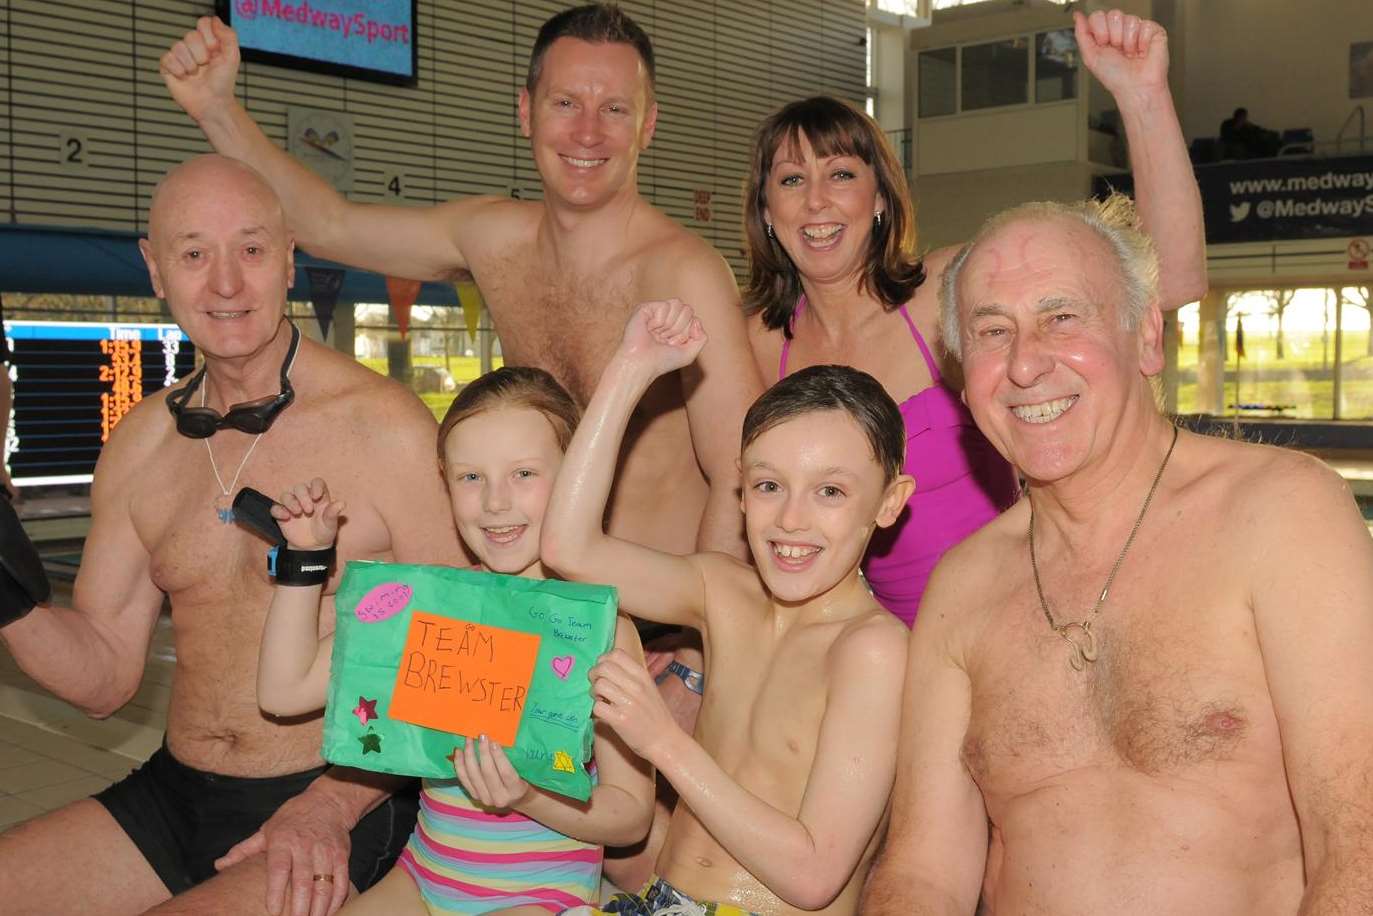 The Brewster family taking part in the Big Swim Challenge as part of last year's Medway Big Splash.